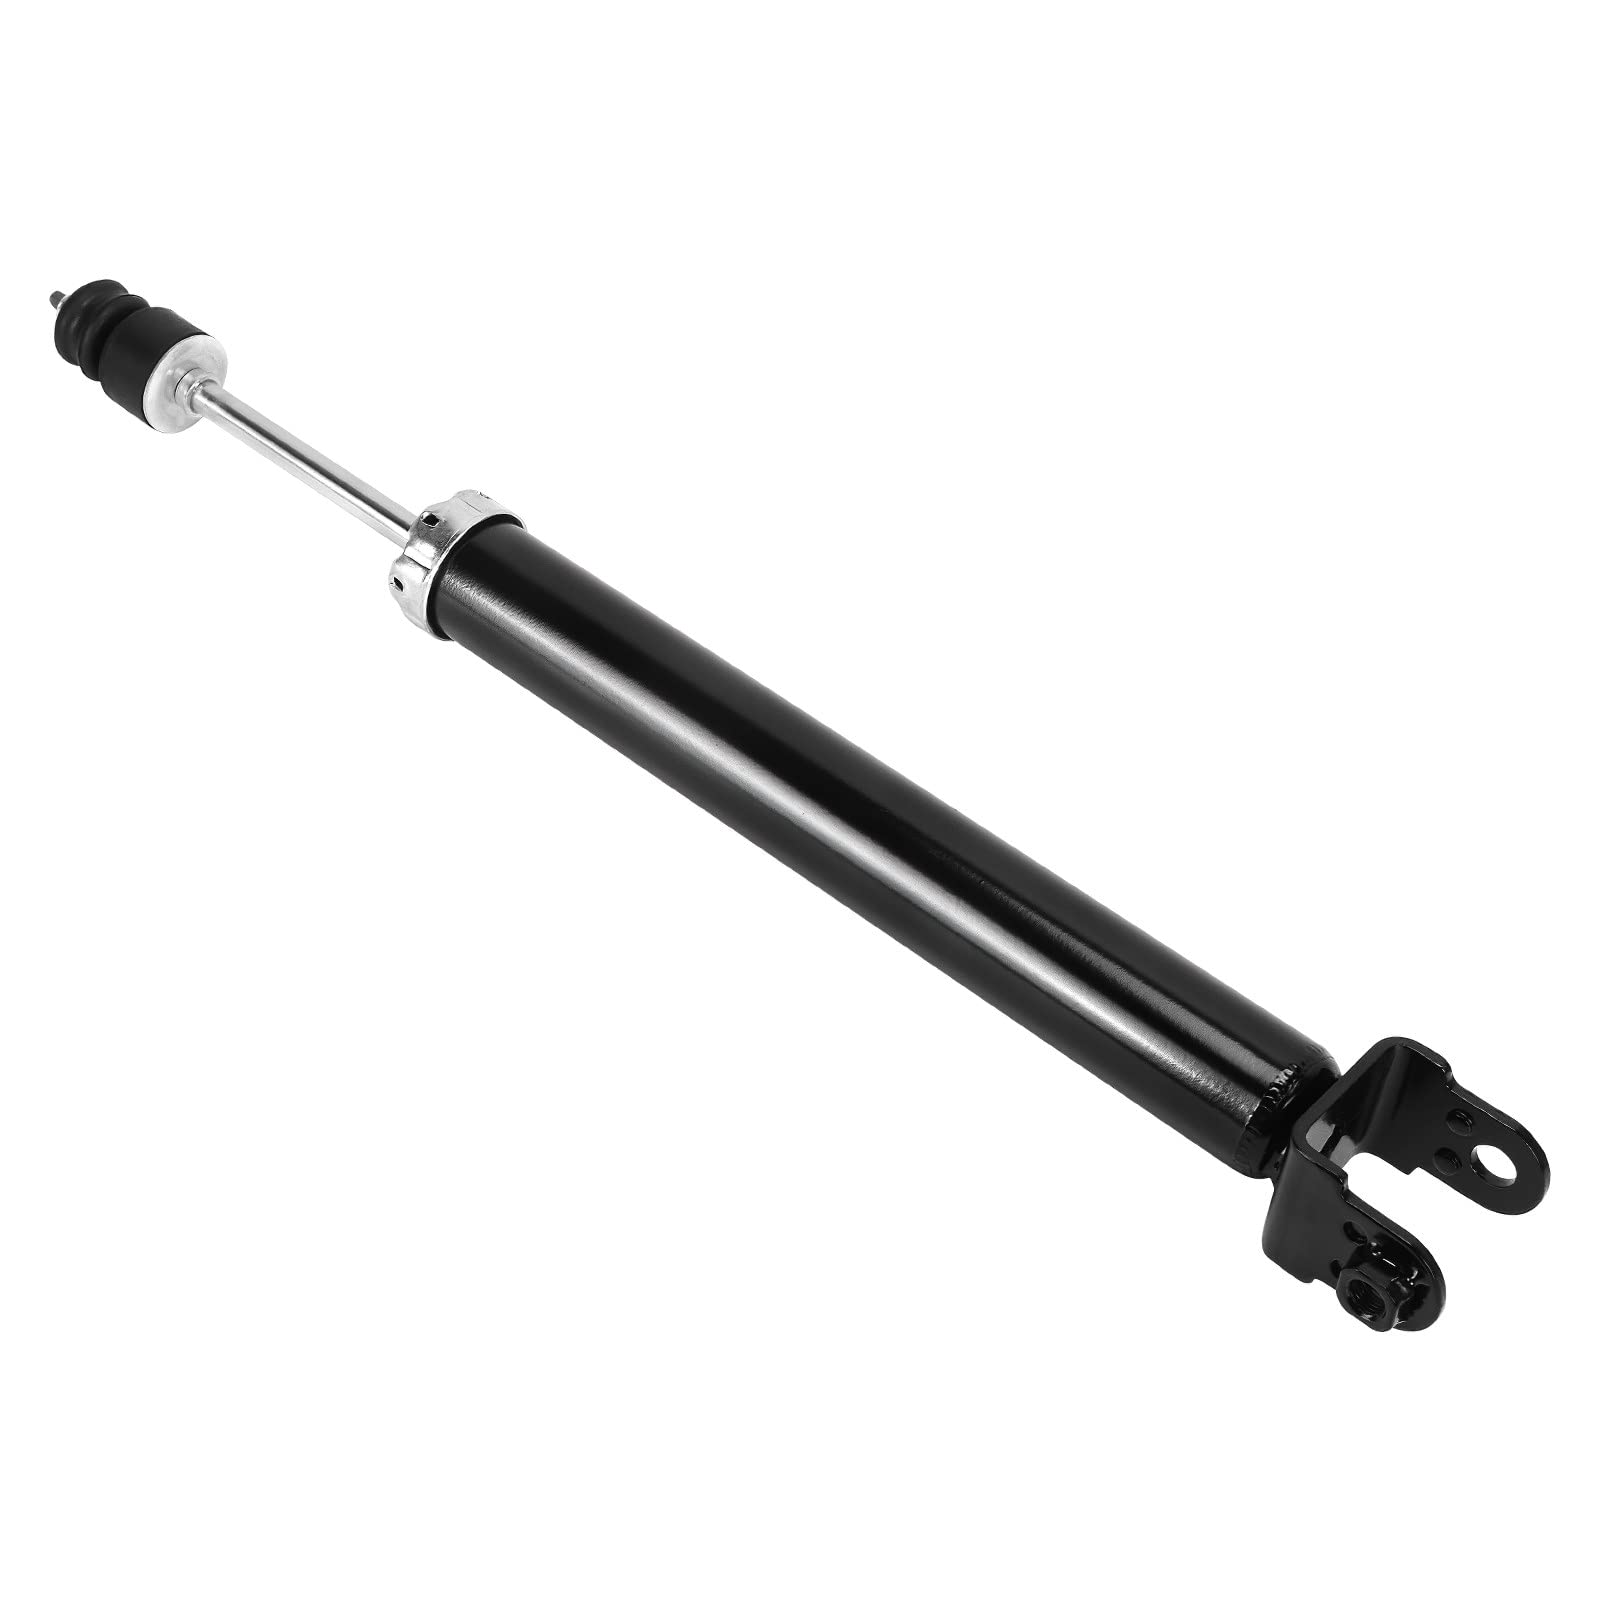 AUTOSAVER88 Front Complete Struts & Rear Shock Absorbers Compatible with 2007-2012 Exc. Hybrid 2013 Altima S 2.5L Coupe